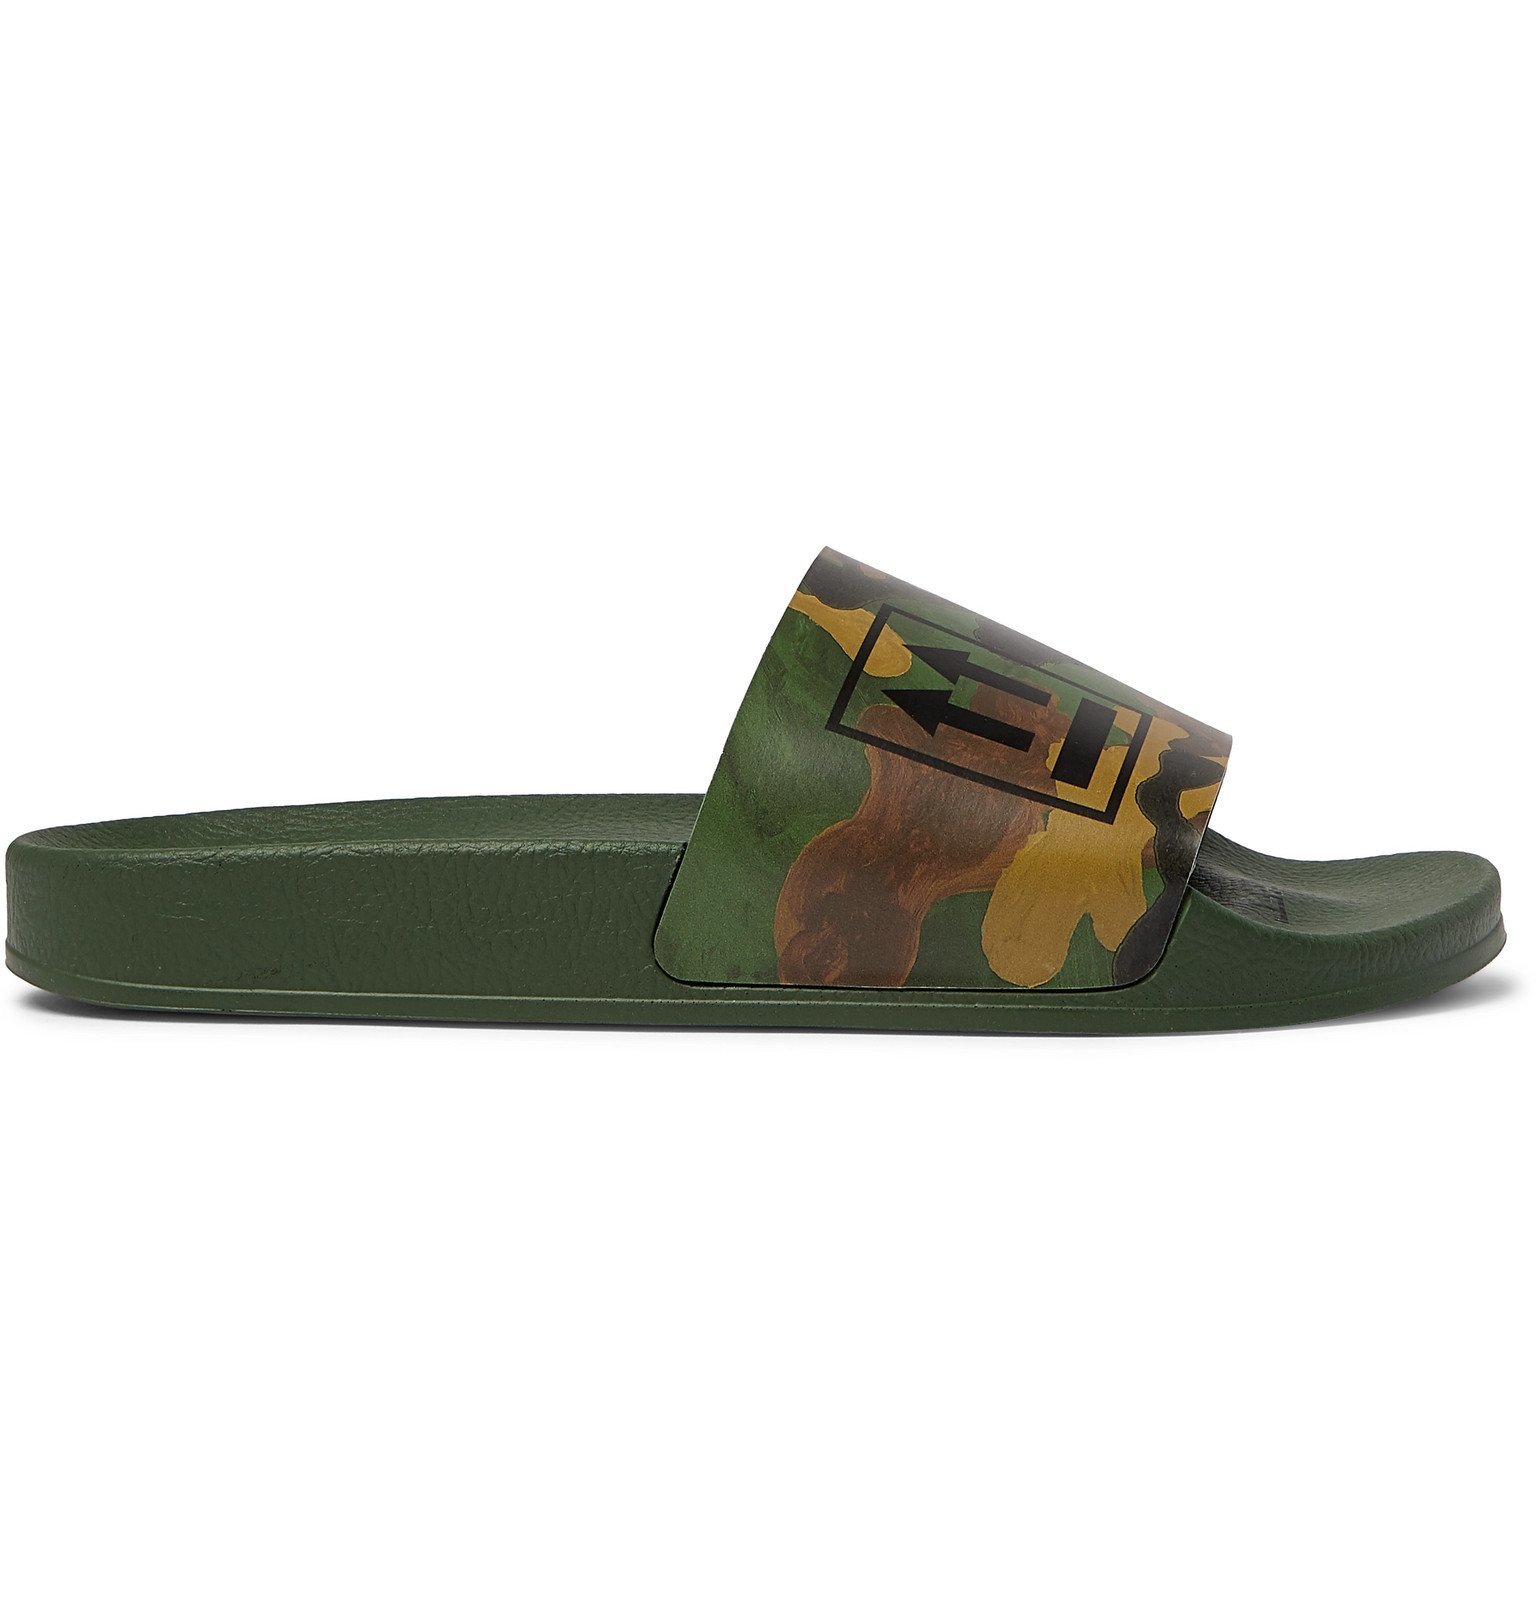 Off-White - Camouflage-Print Rubber Slides - Green Off-White